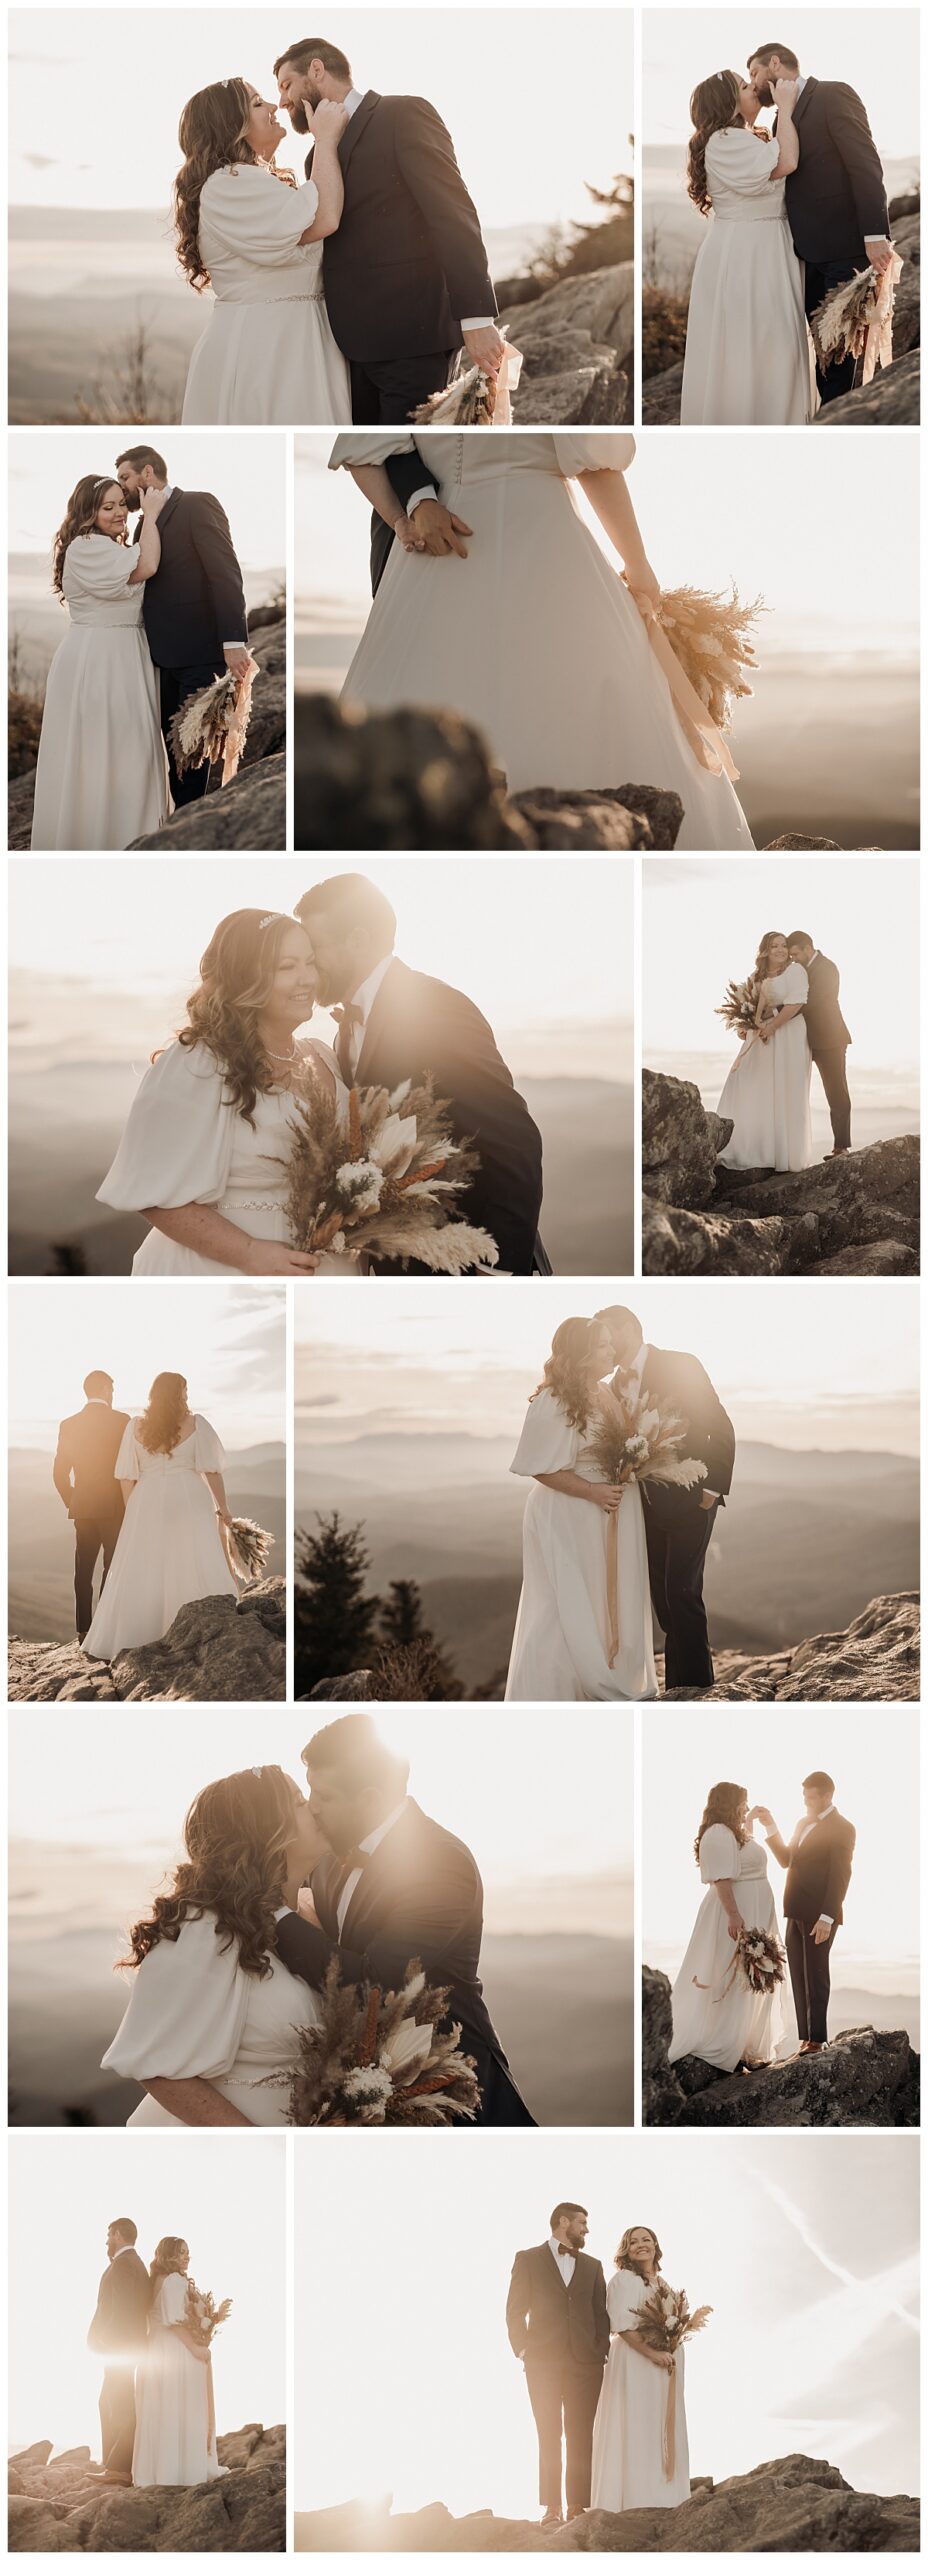 Golden hour bride and groom pictures on the mountainside for their wedding portraits for a boho elopement at Grandfather Mountain in Linville, NC captured by Paisley Sunshine Photography, a North Carolina Wedding and Elopement Photographer. 